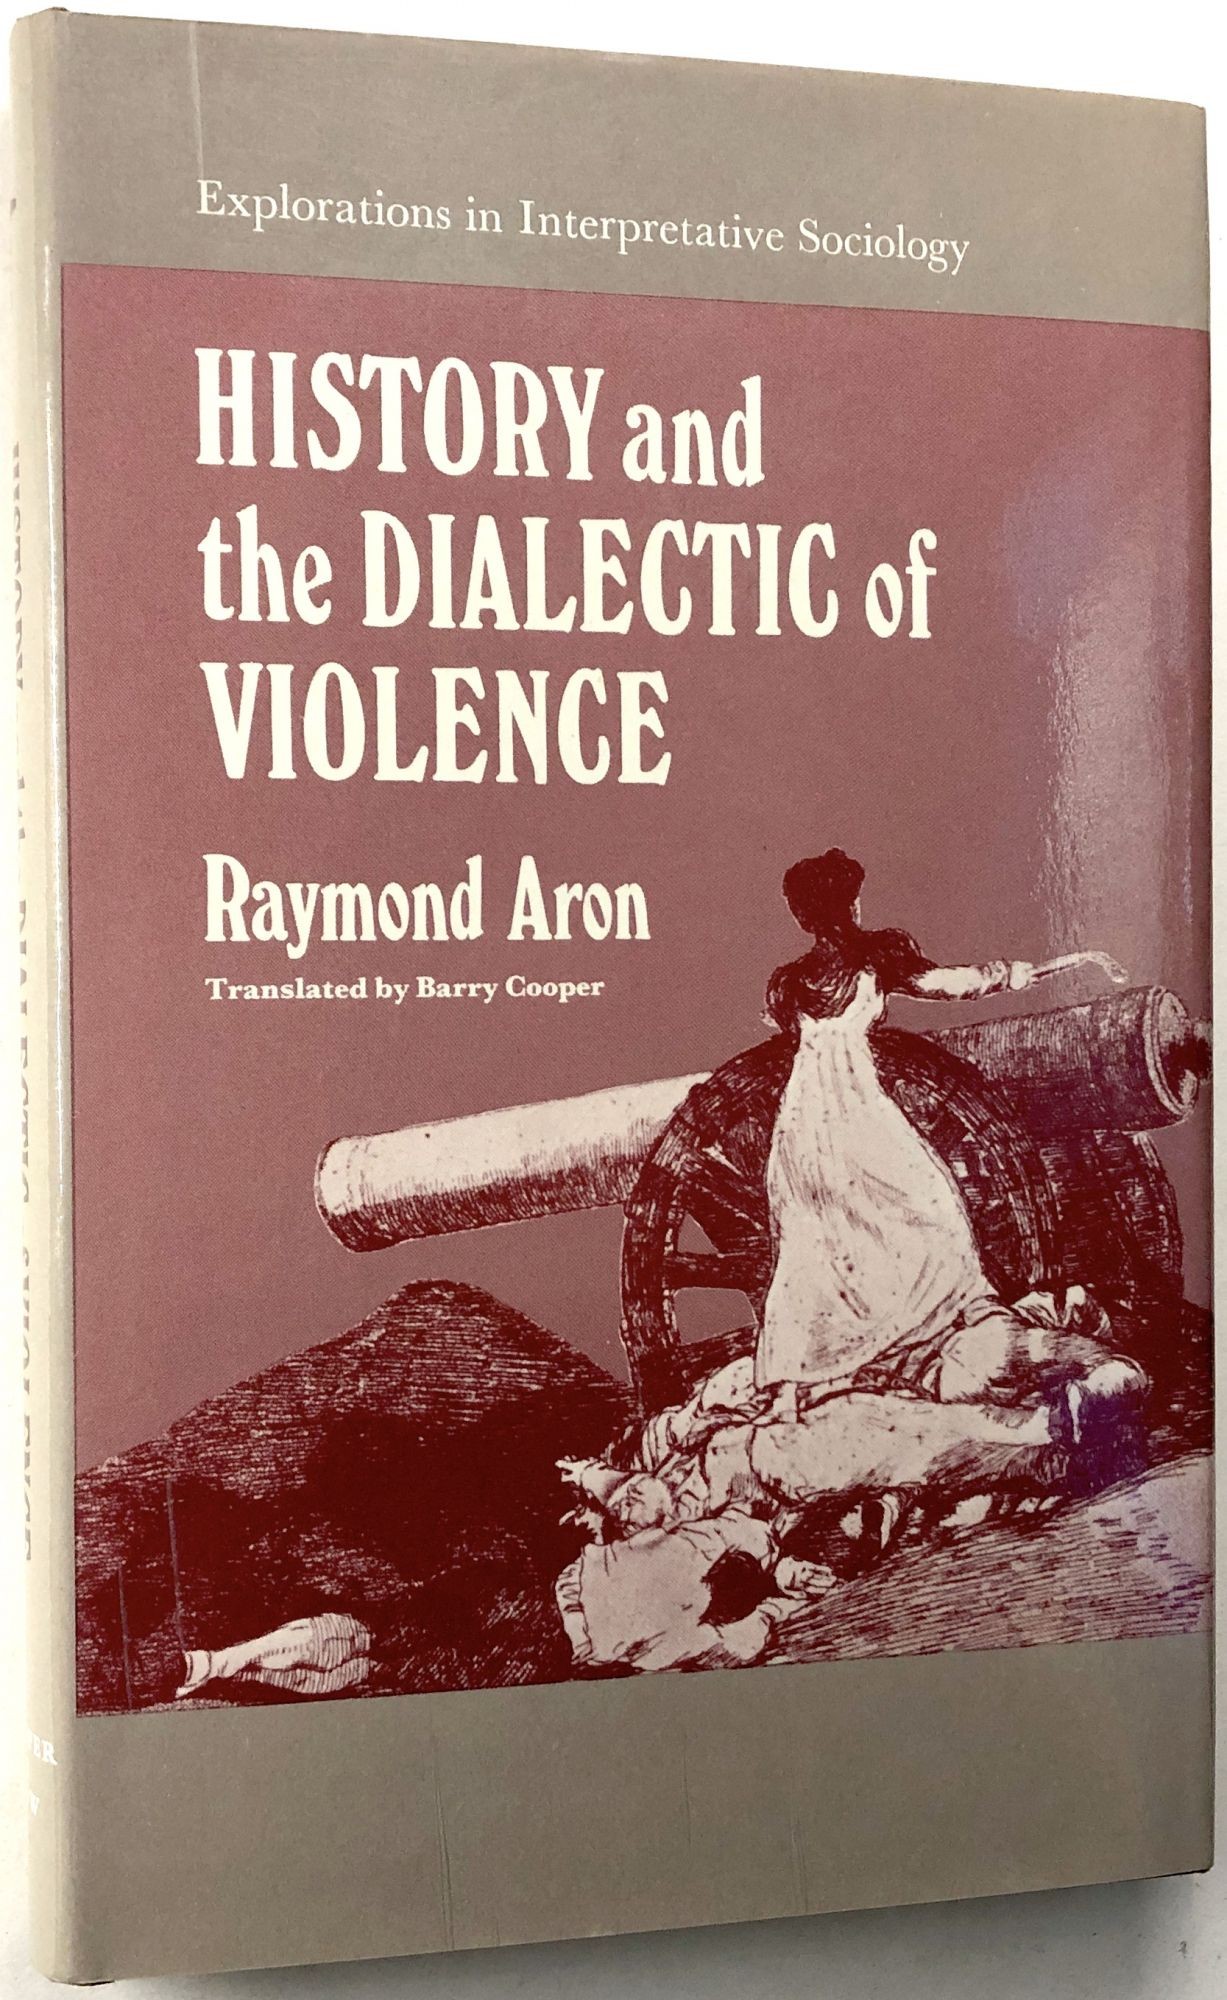 History and the Dialectic of Violence